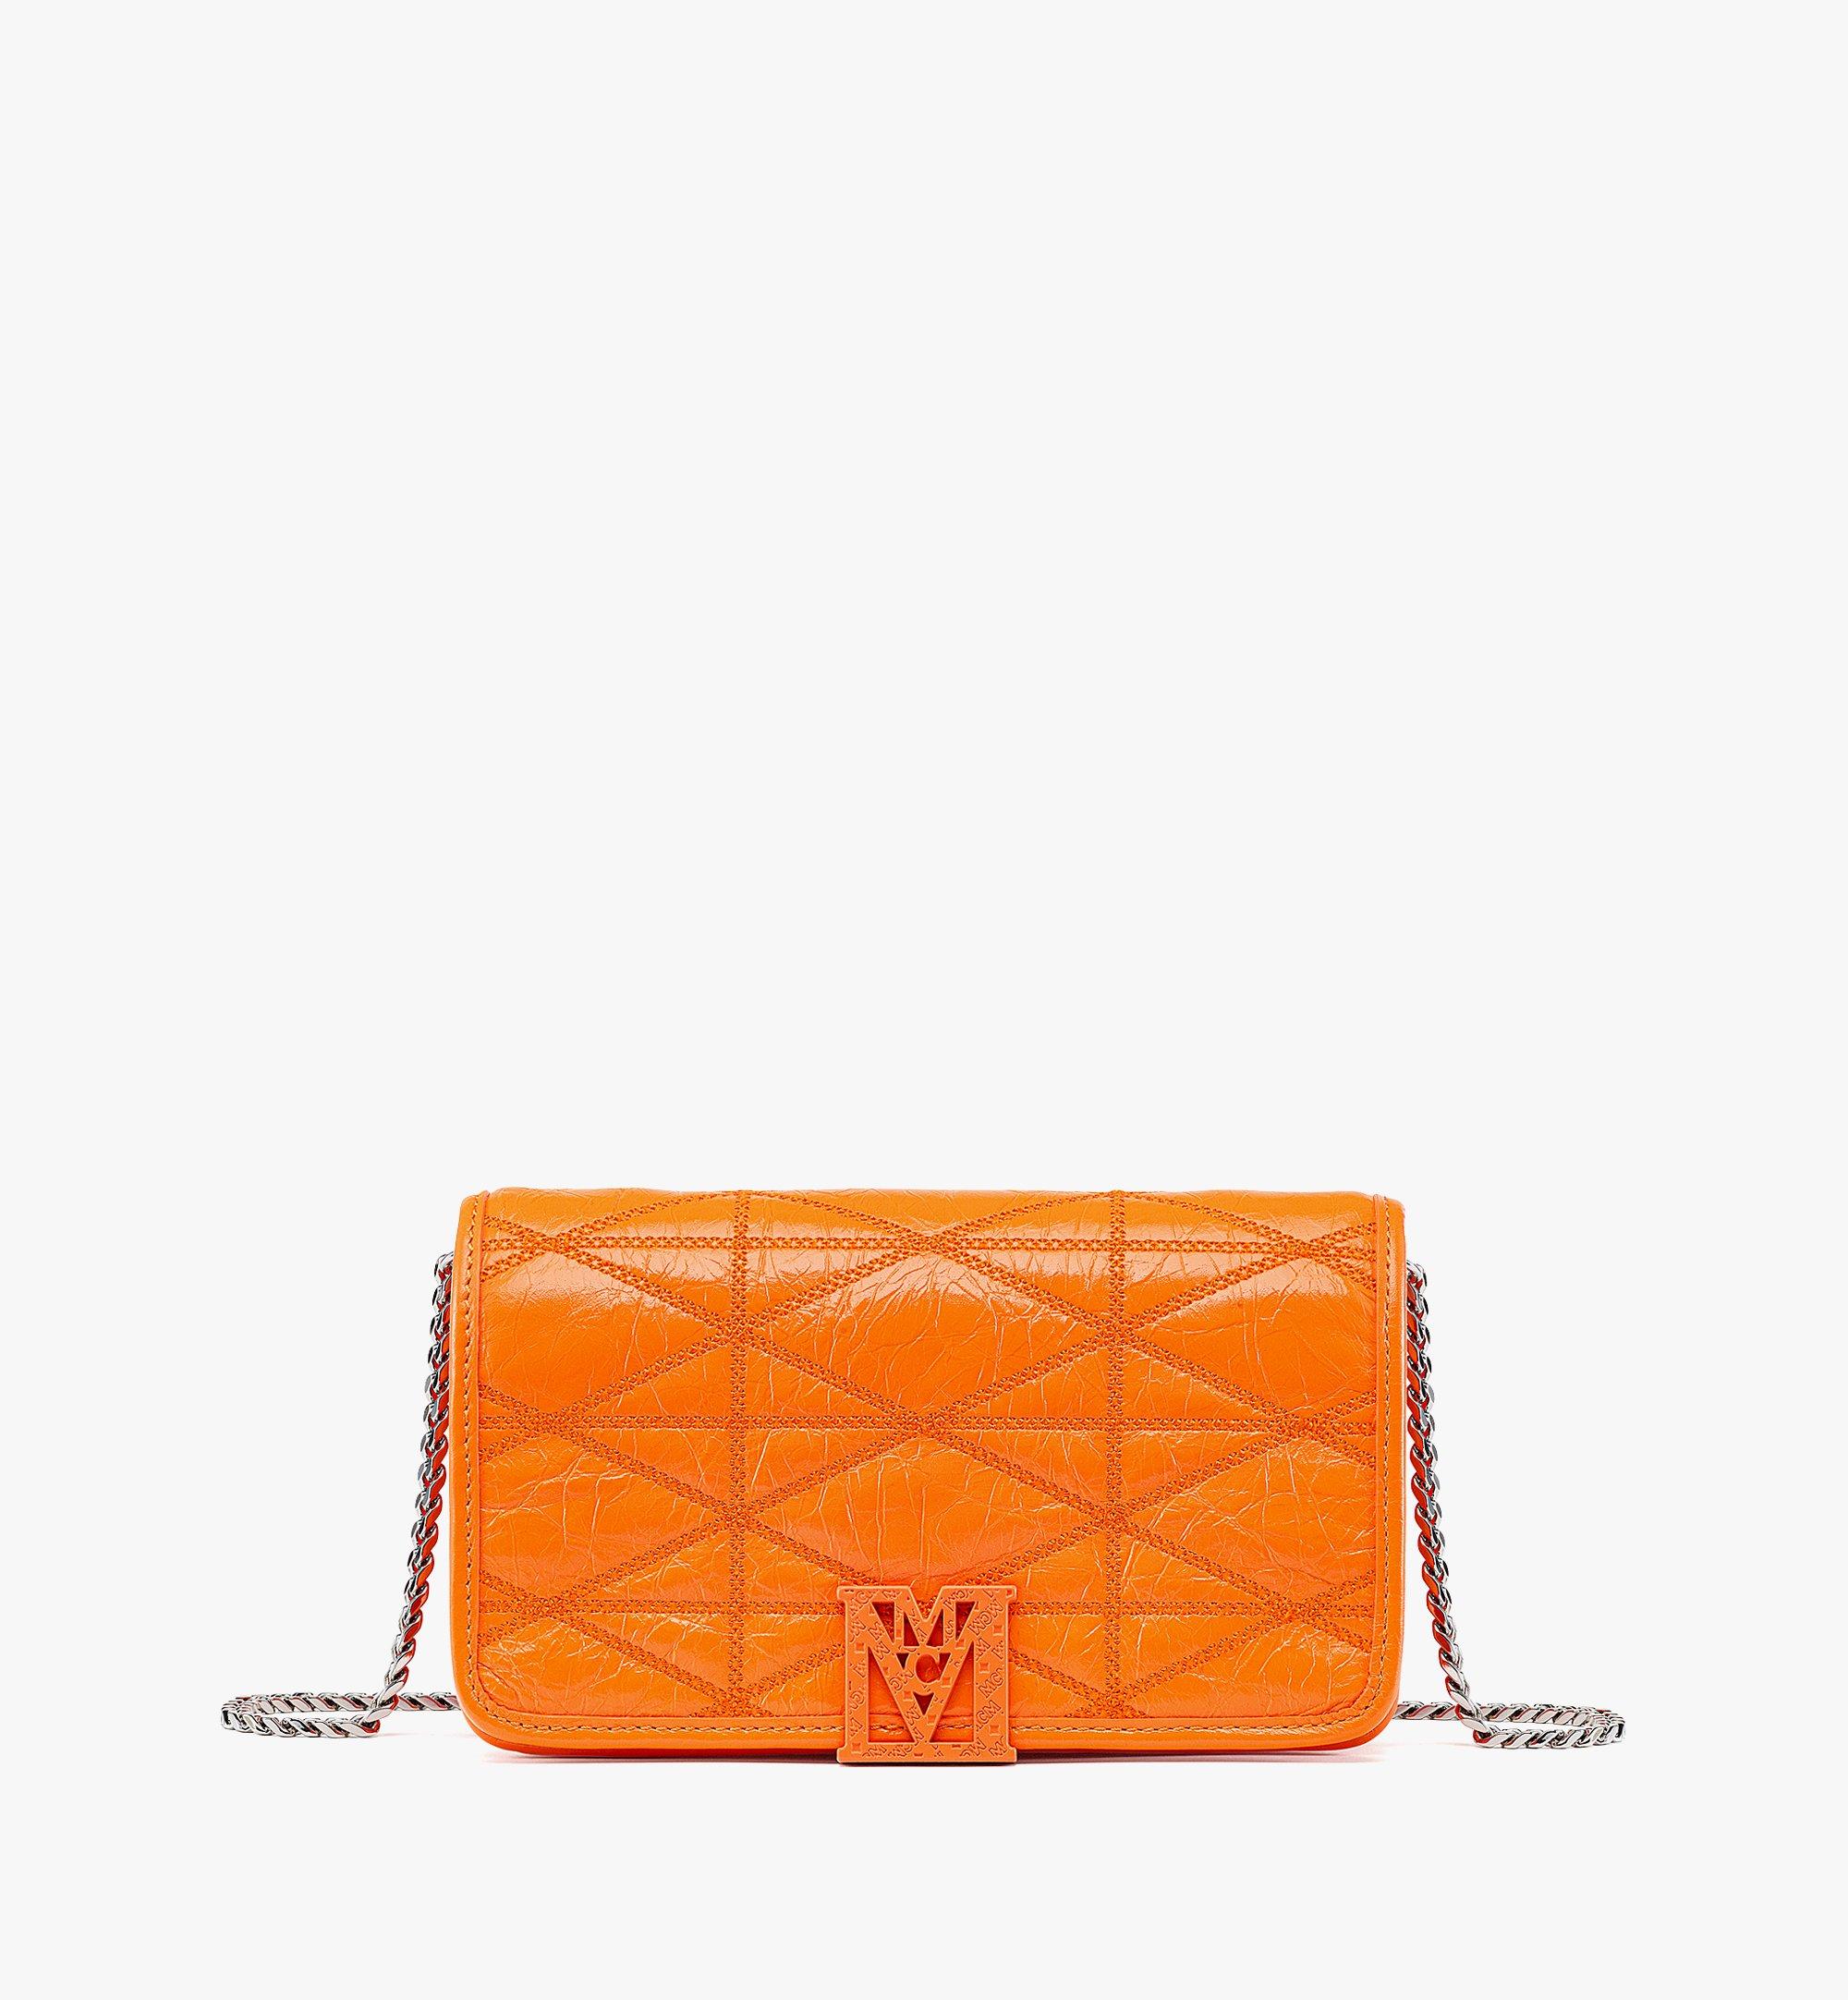 MCM Travia Quilted Chain Wallet in Crushed Leather Orange MYLDALM01O0001 Alternate View 1